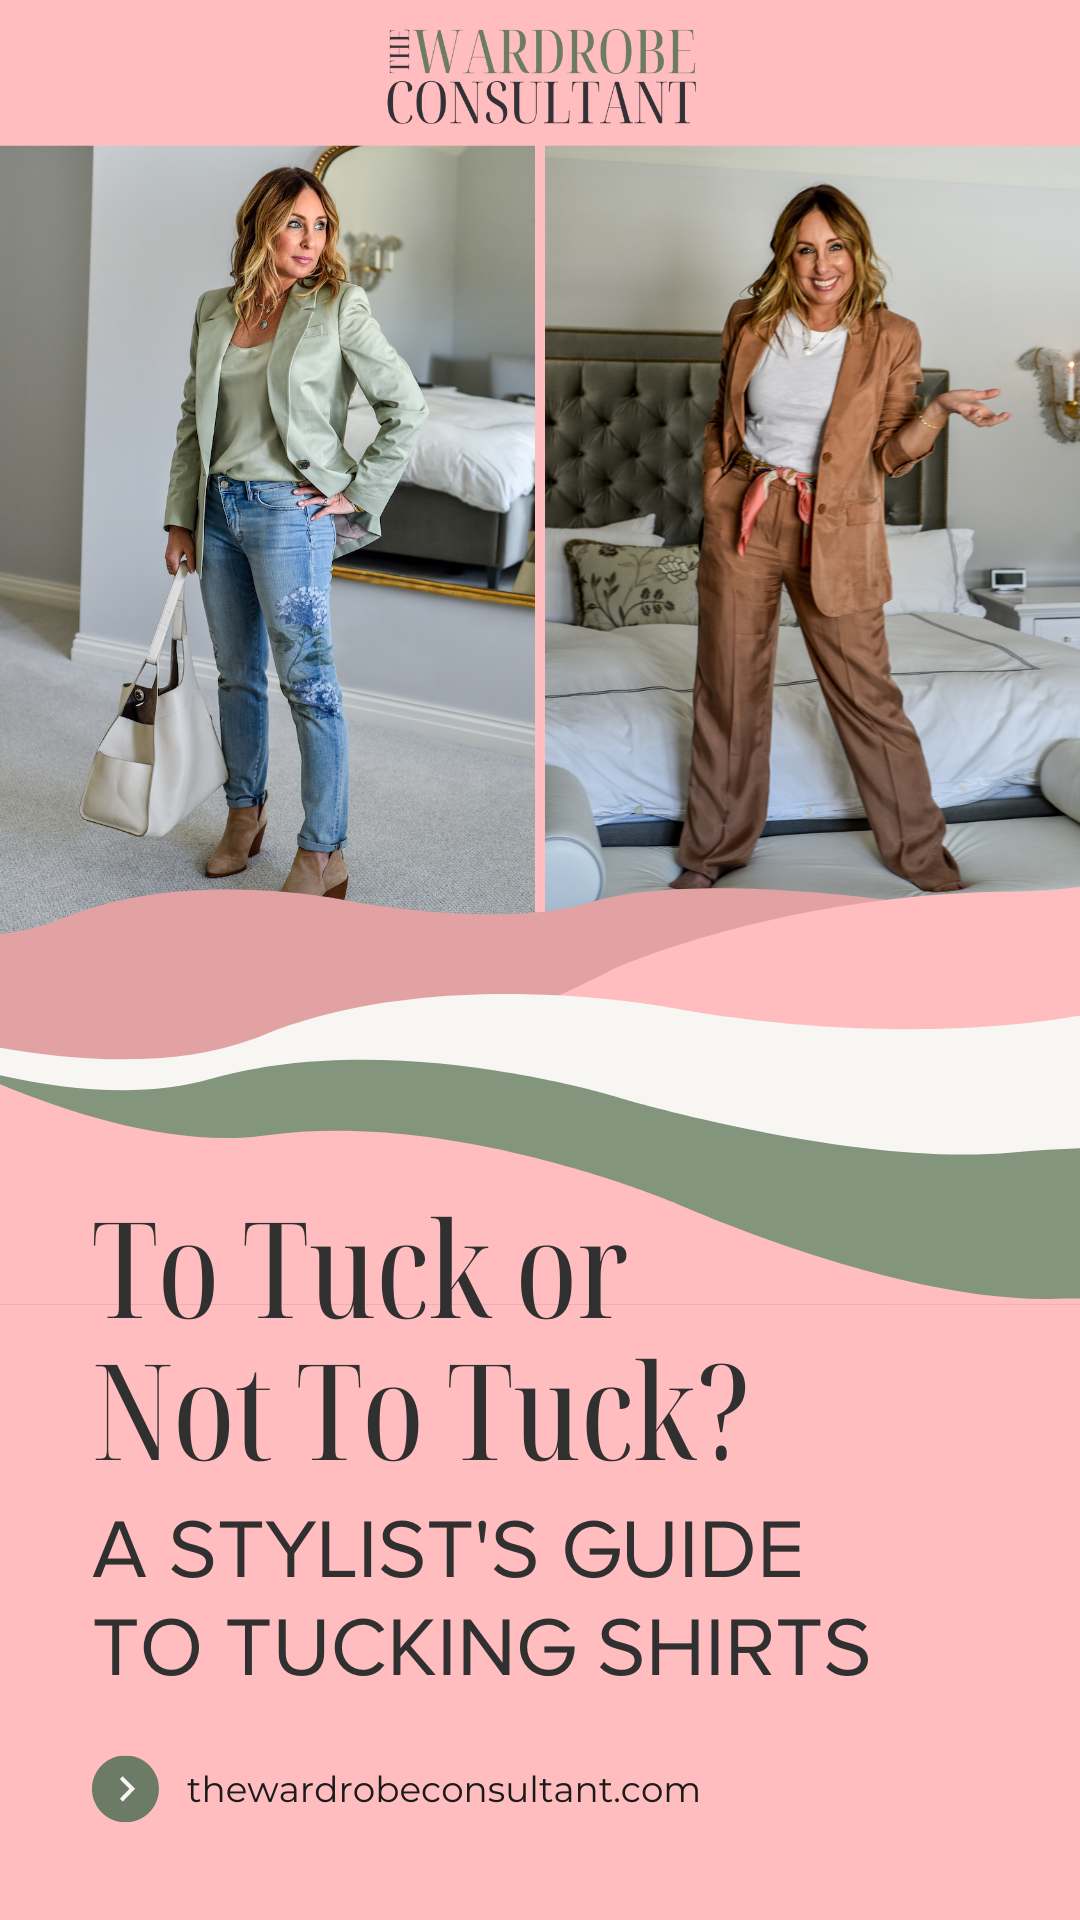 To Tuck or Not to Tuck?